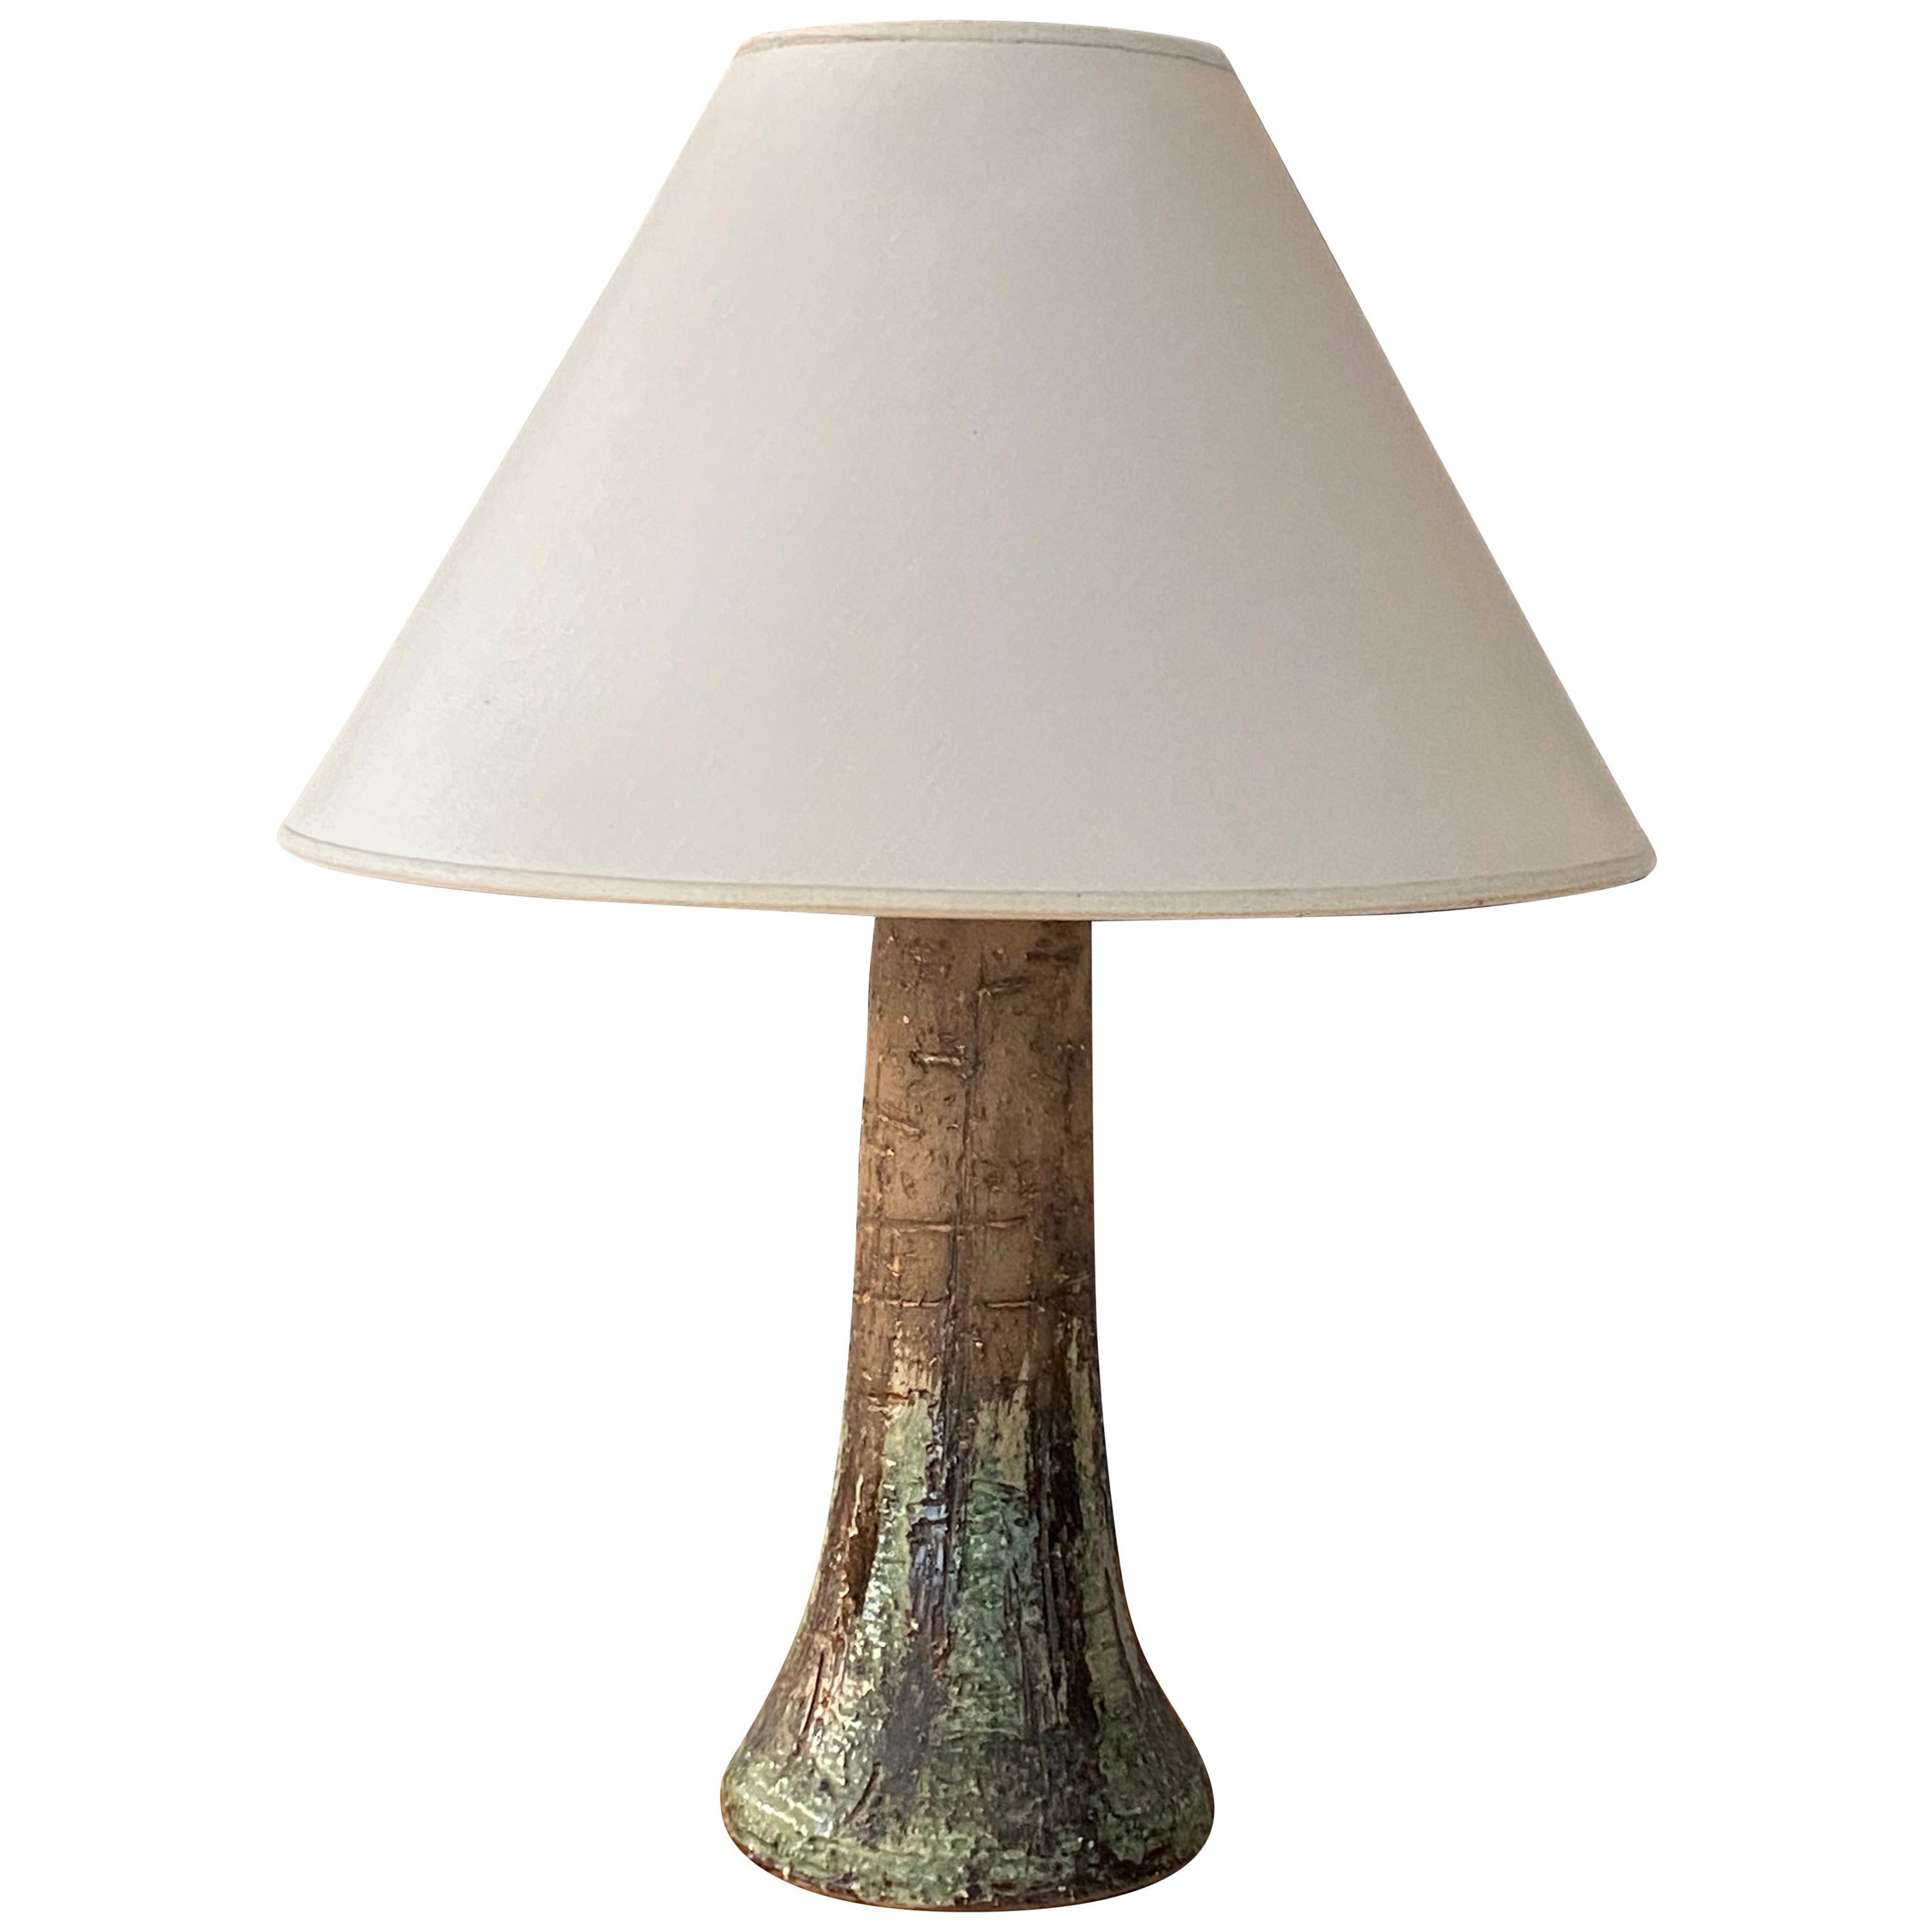 Tilgmans, Semi-Glazed and Sgraffito-Painted Table Lamp, Stoneware, Sweden, 1950s